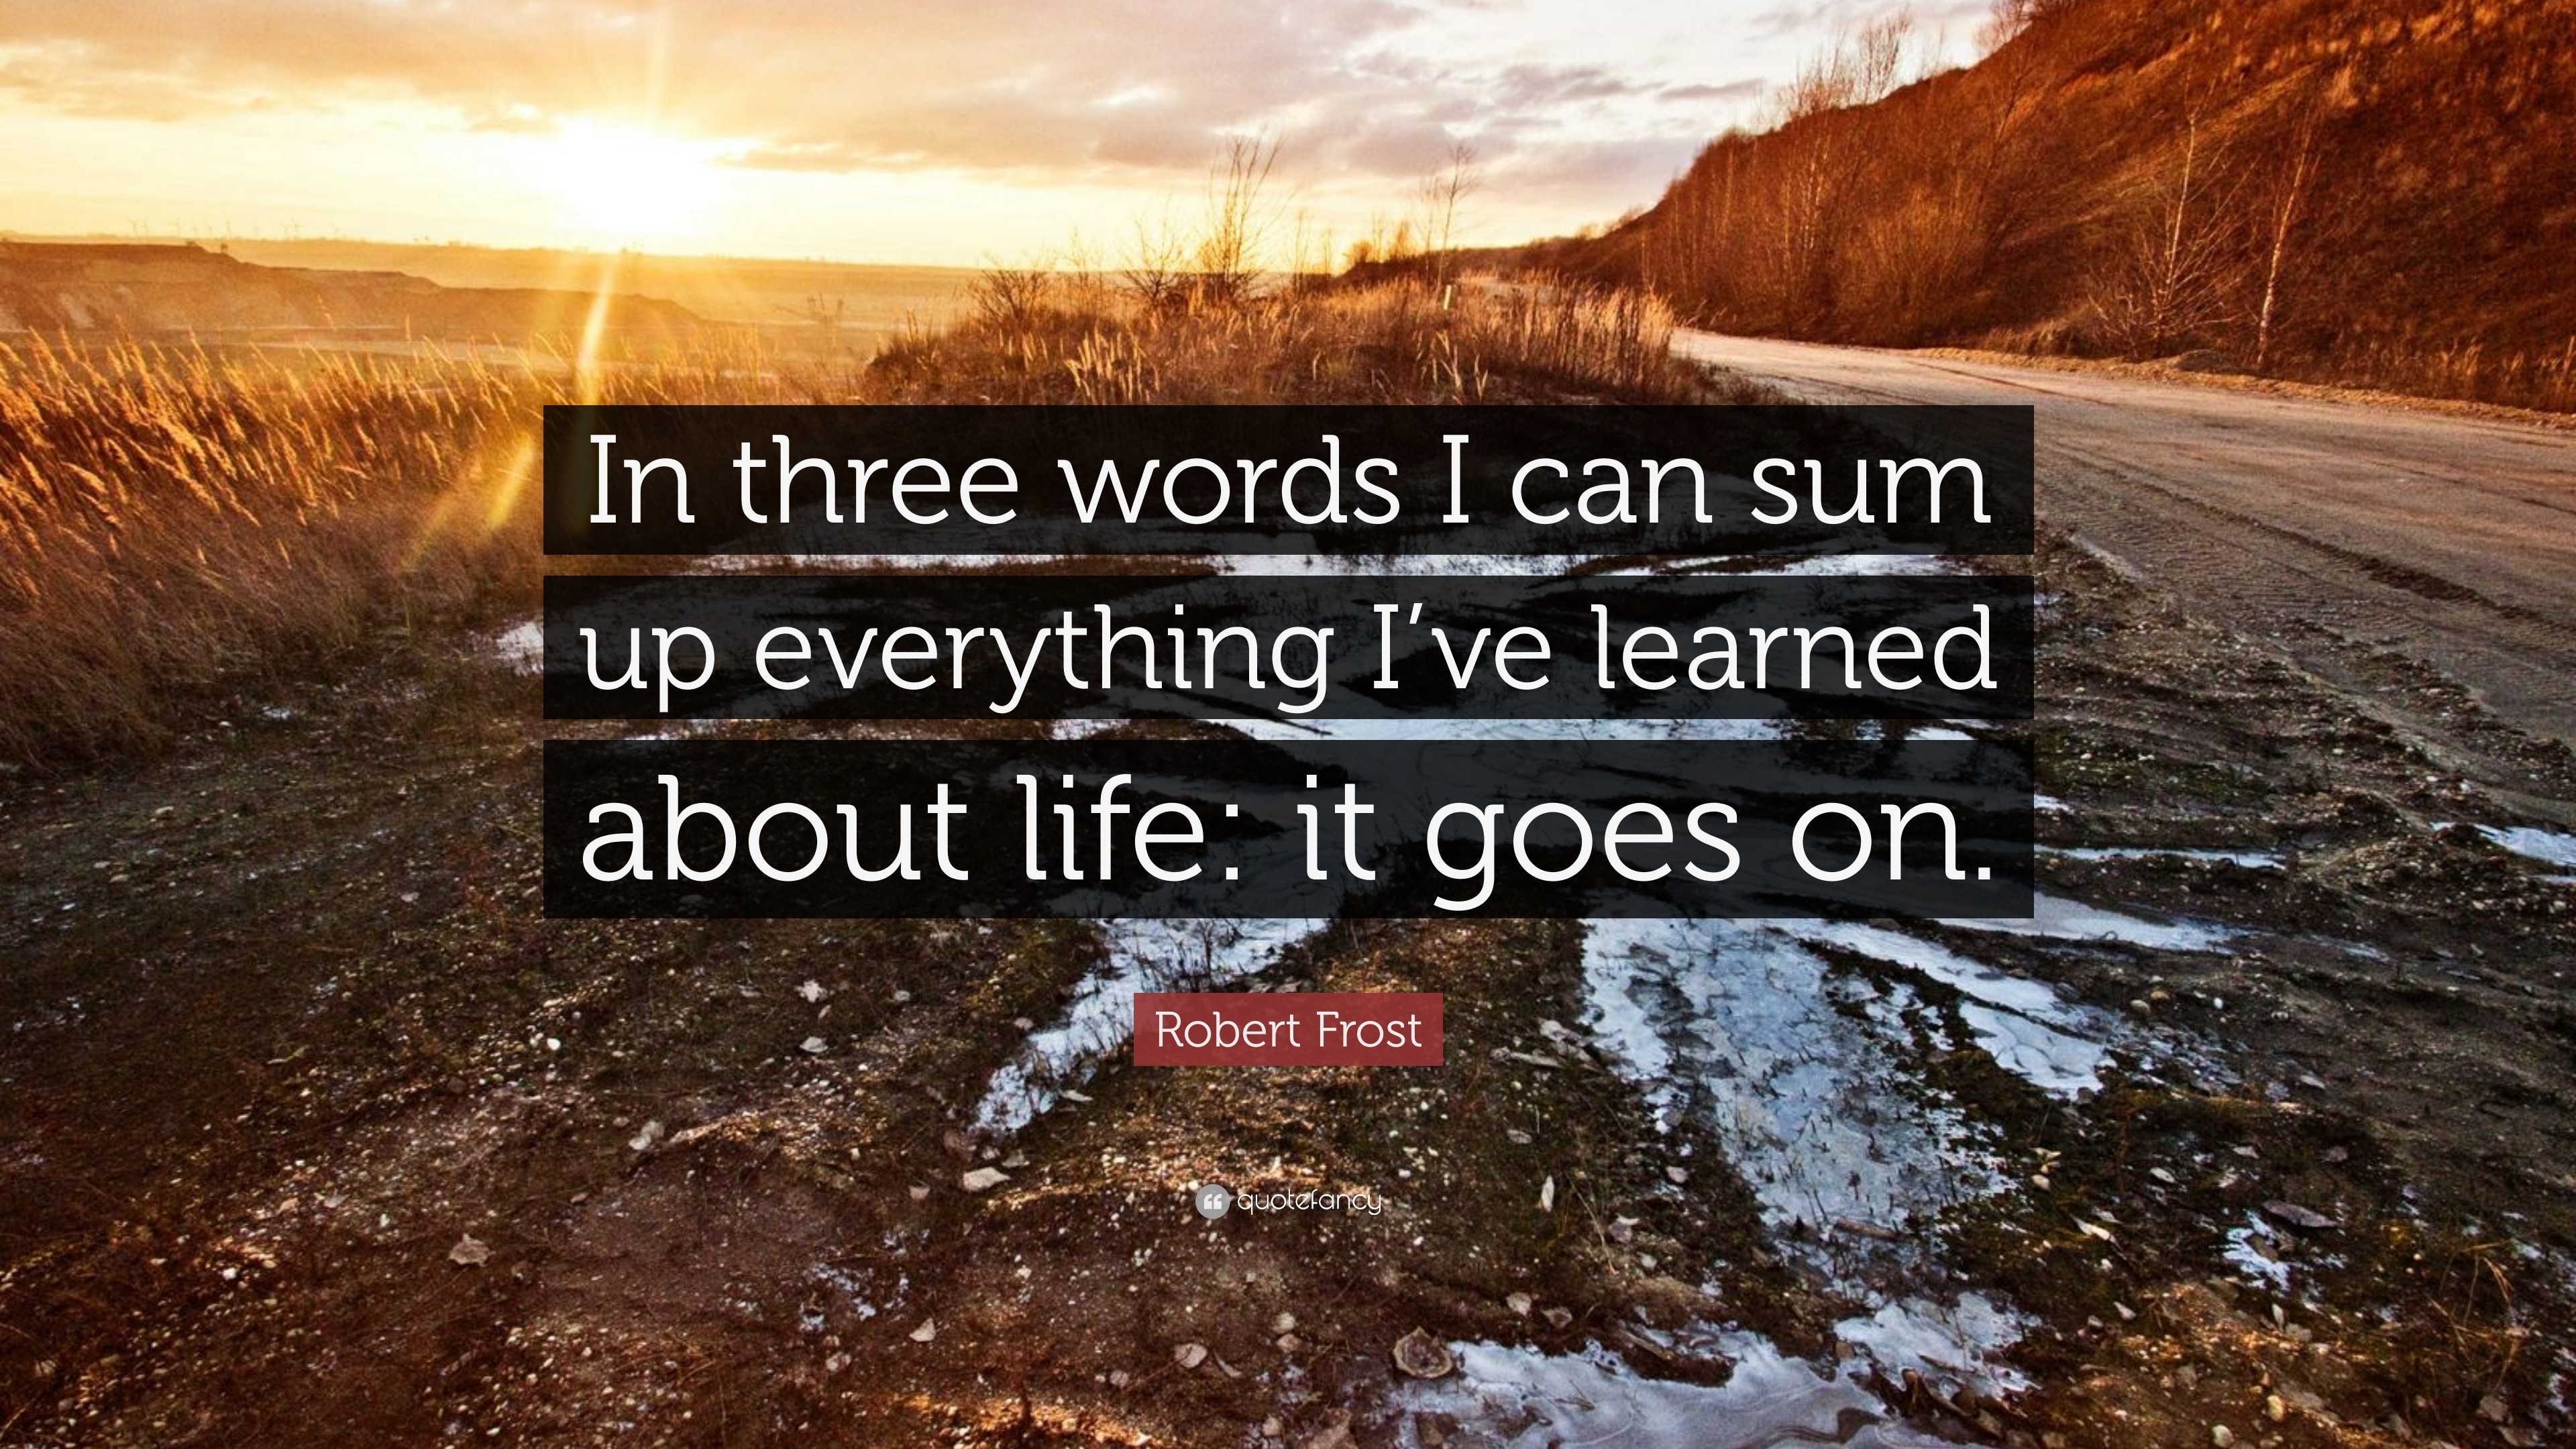 Robert Frost Quote “In three words I can sum up